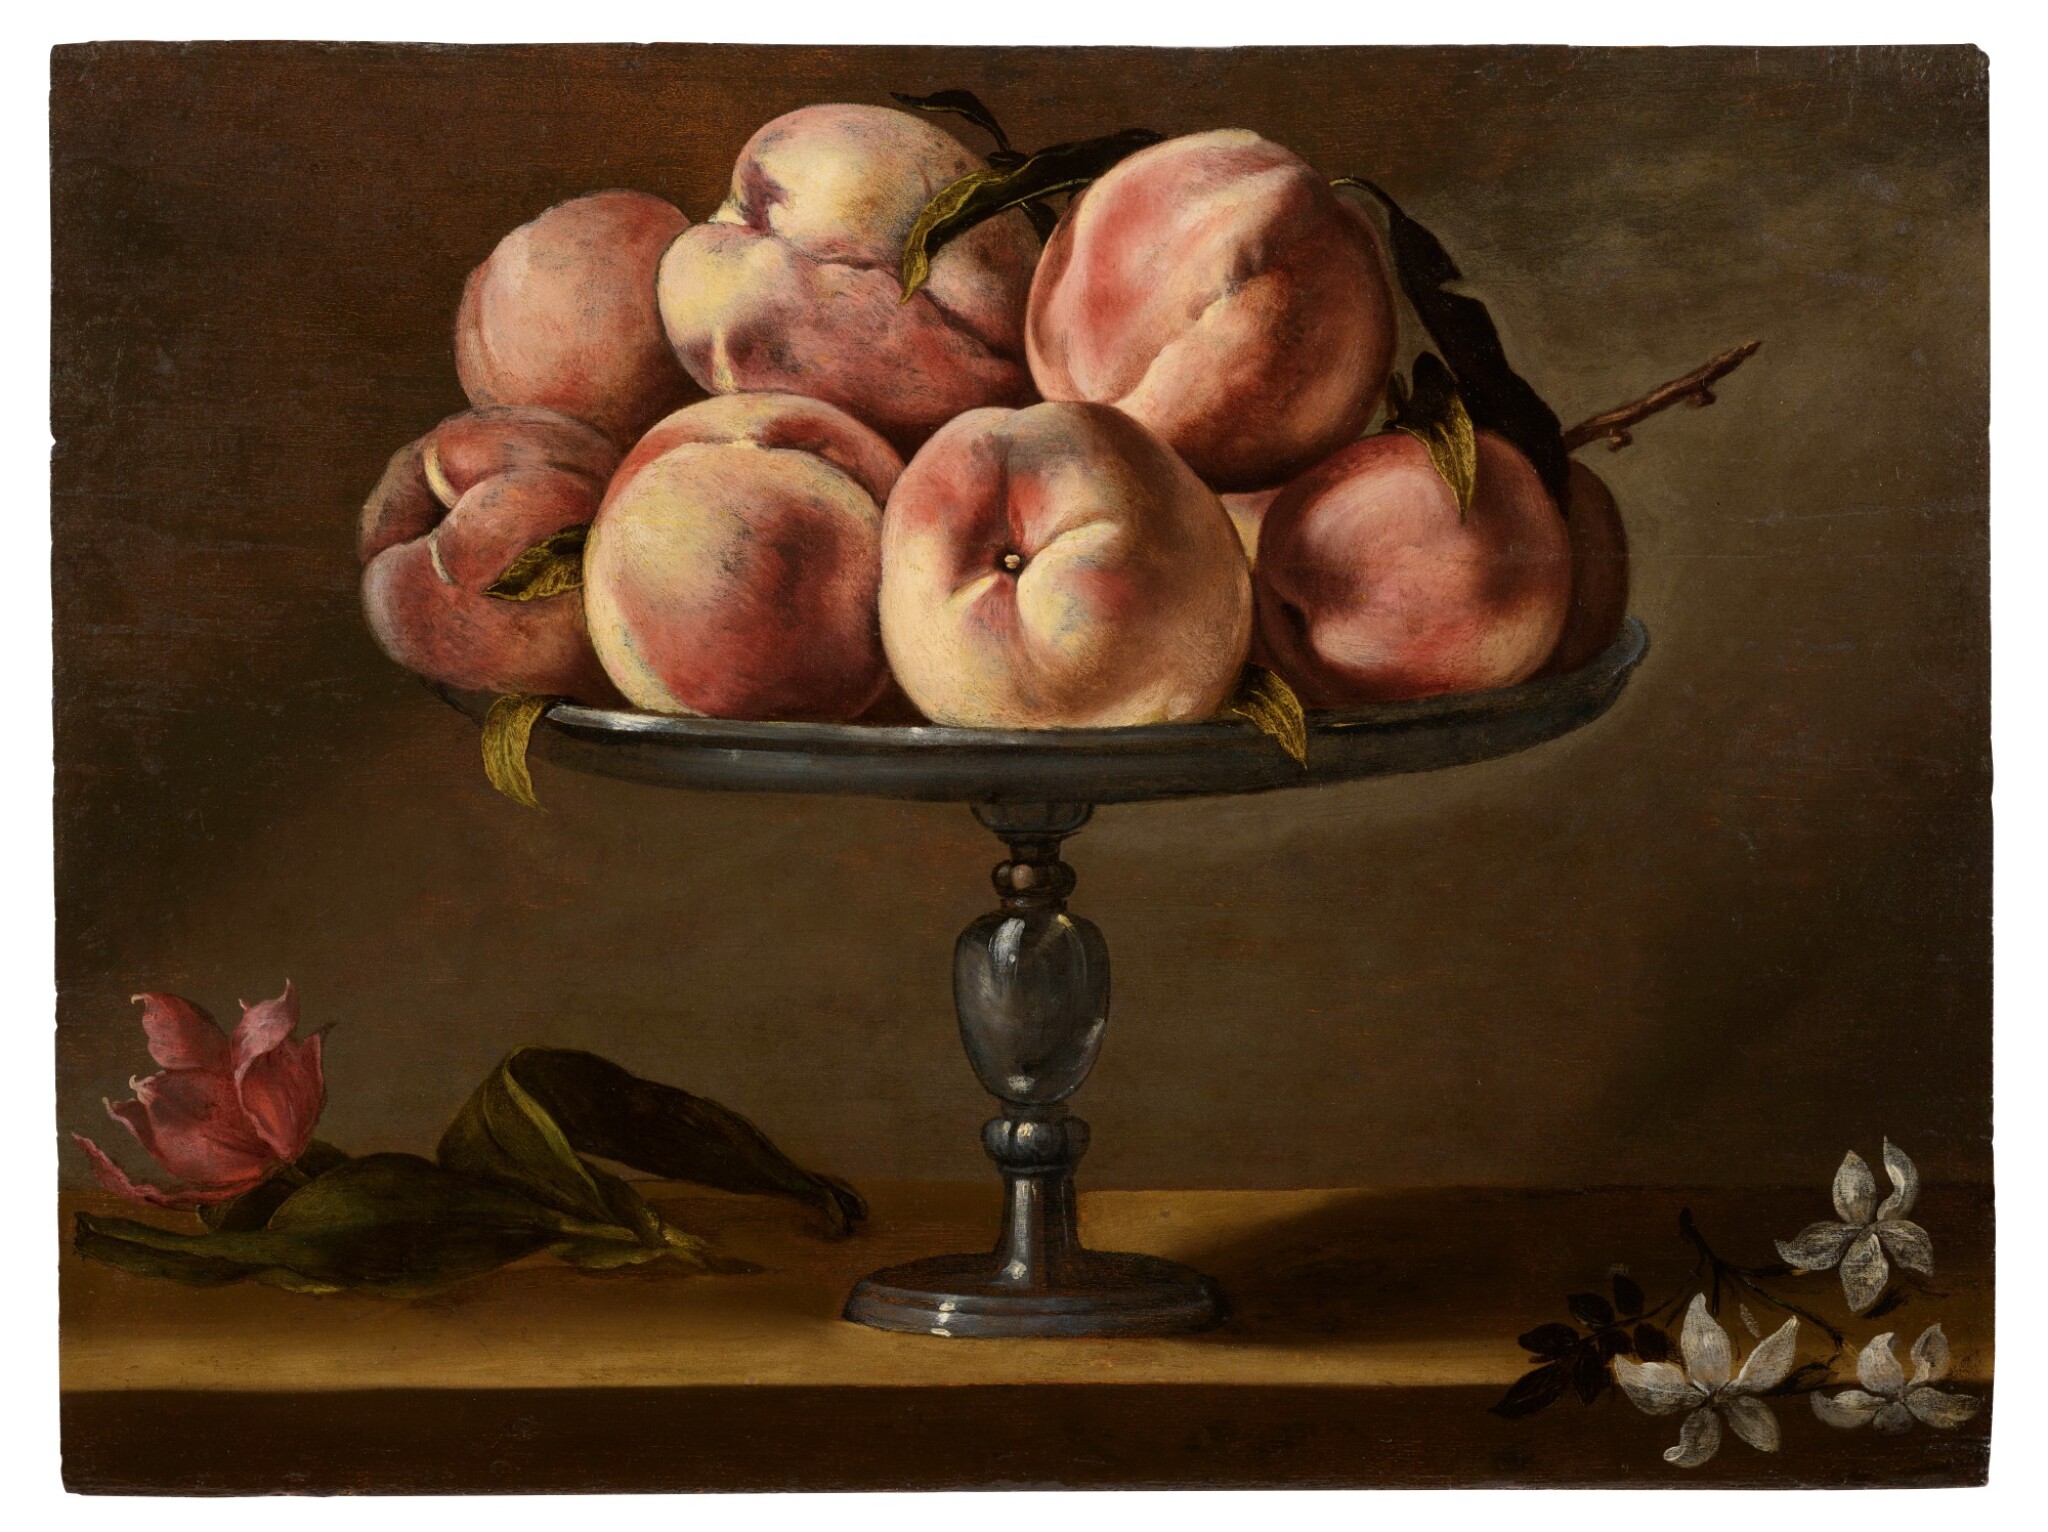 Still life of peaches on a fruit stand with flowers by Fede Galizia - 38.6 x 51.8 cm private collection